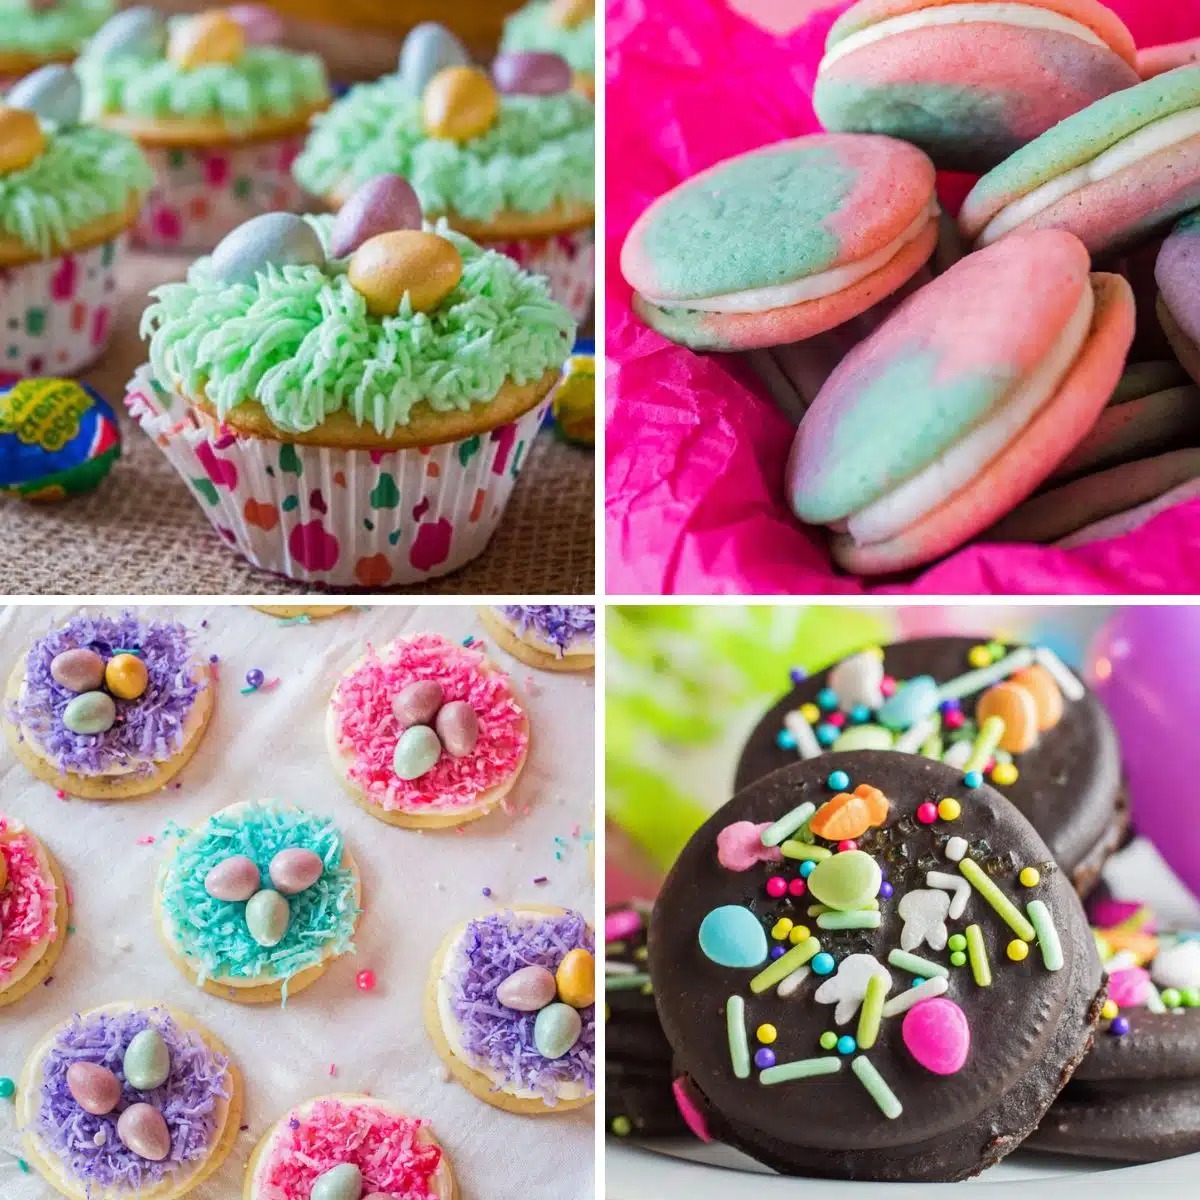 Best Easter dessert recipes to make this year with your Easter dinner including cupcakes, cakes, cookies, and more!